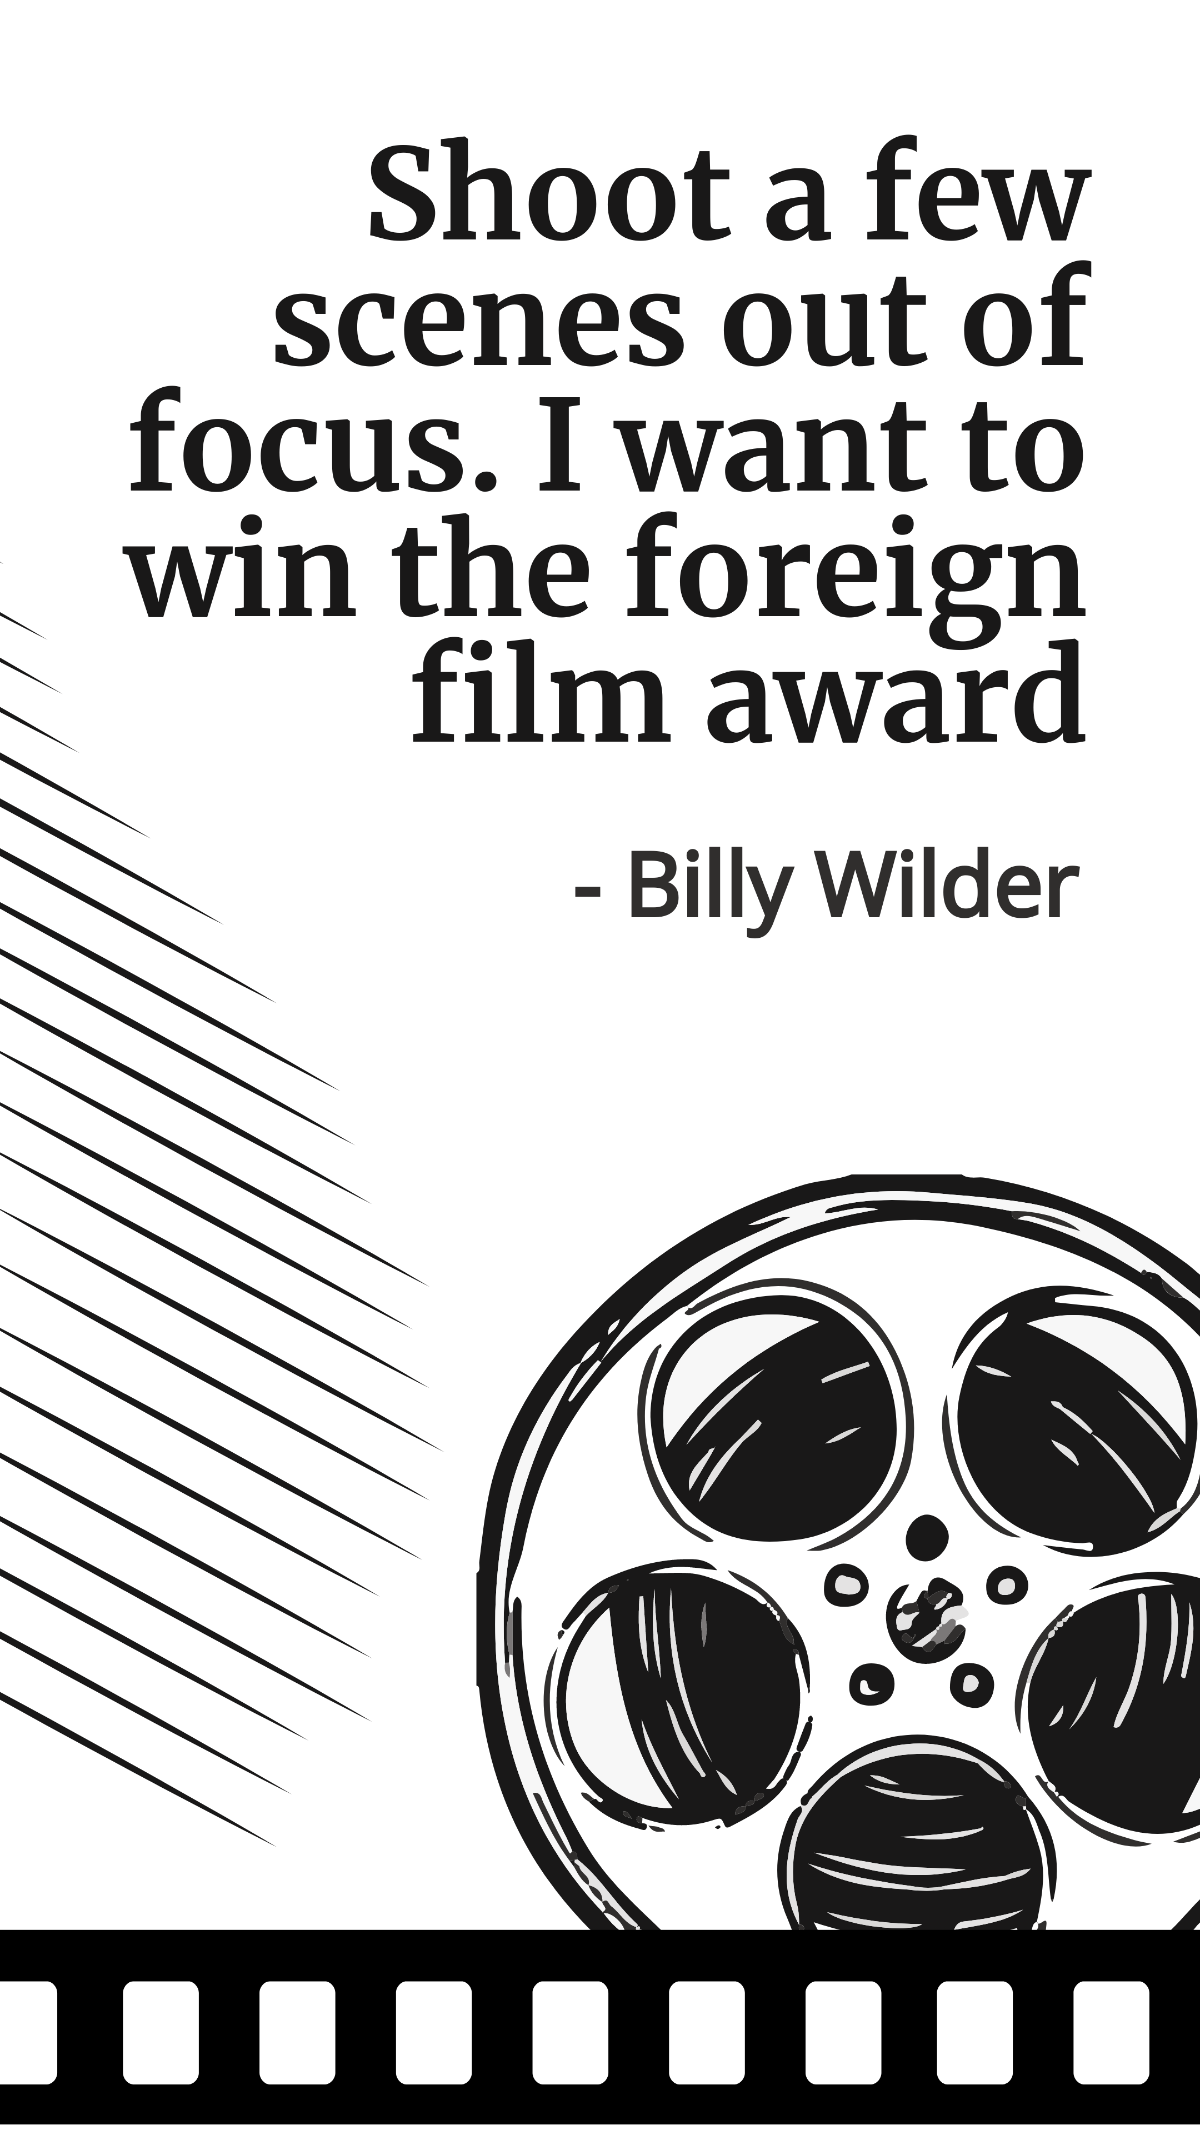 Free Billy Wilder - Shoot a few scenes out of focus. I want to win the foreign film award Template